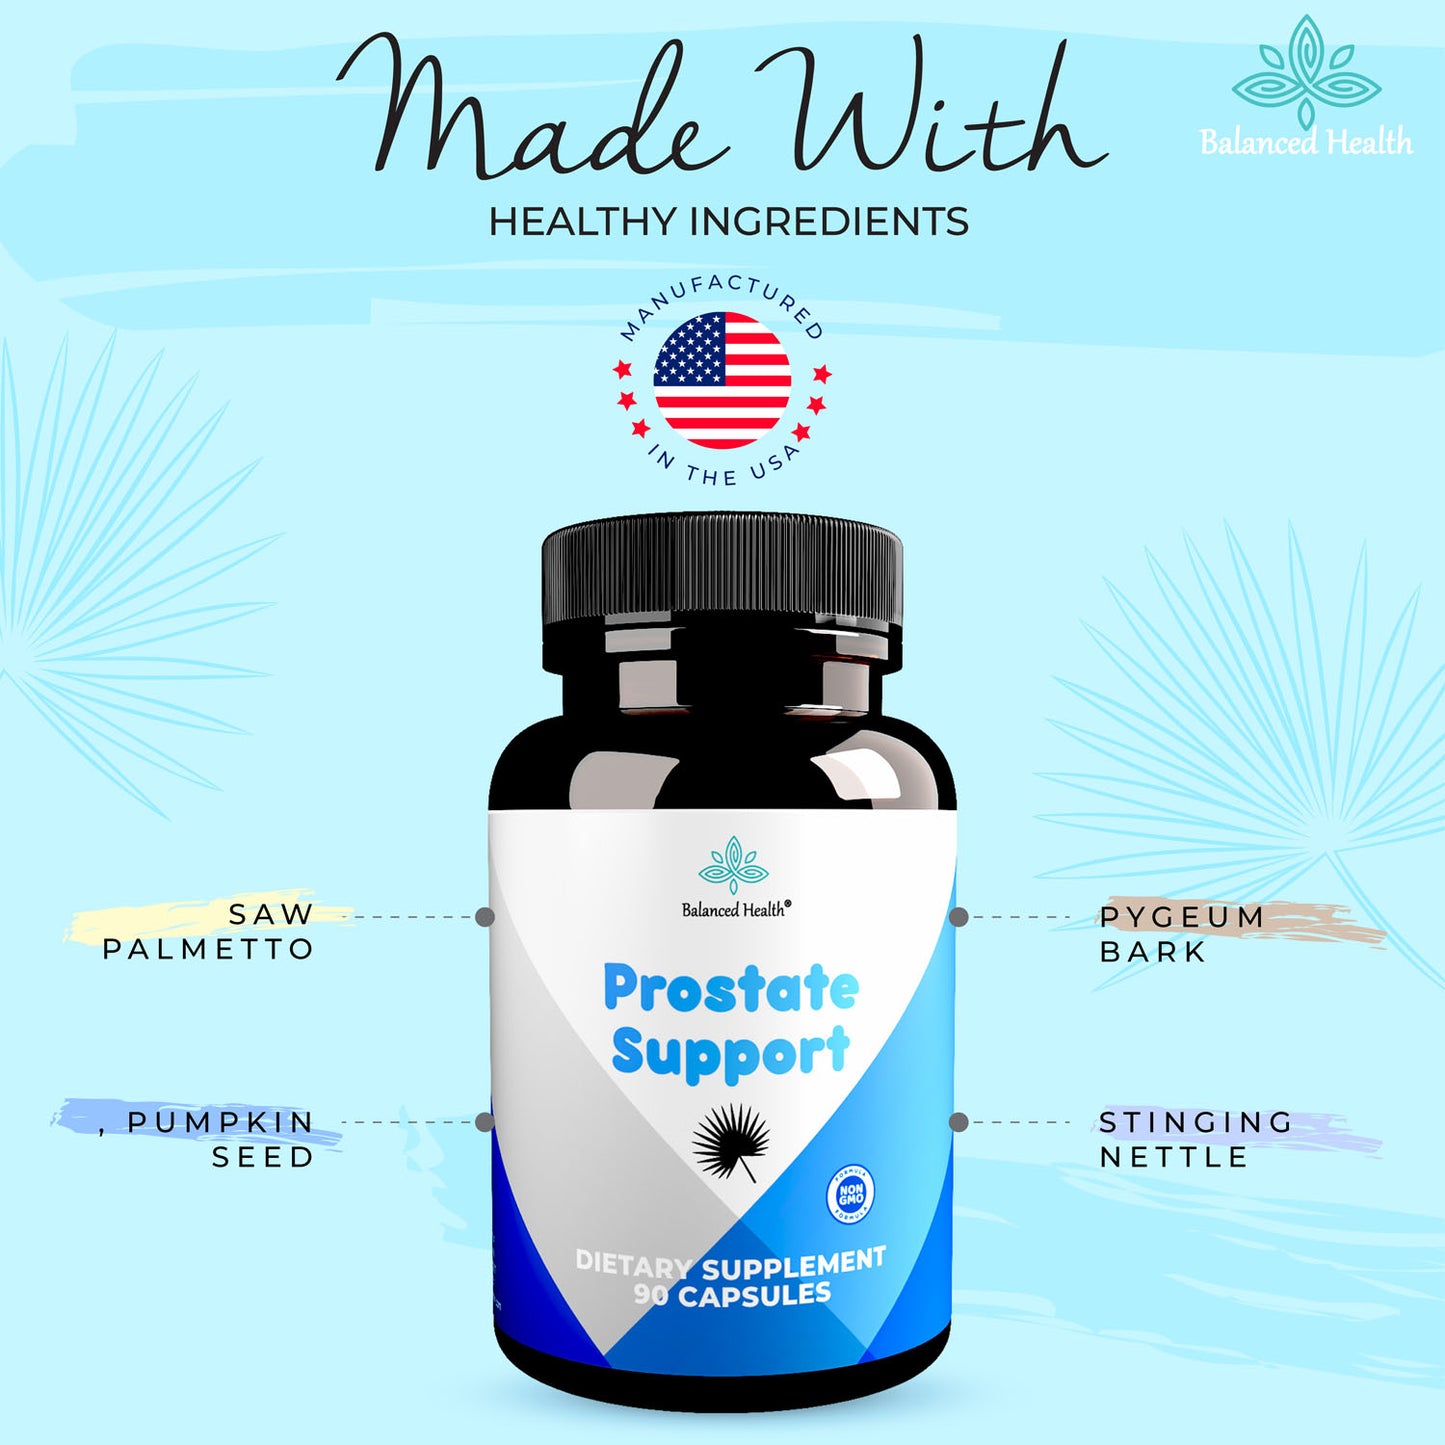 Balanced Health Men's Prostate Support with saw palmetto, pygeum bark, stinging nettles and pumpkin seed for healthy prostate support.